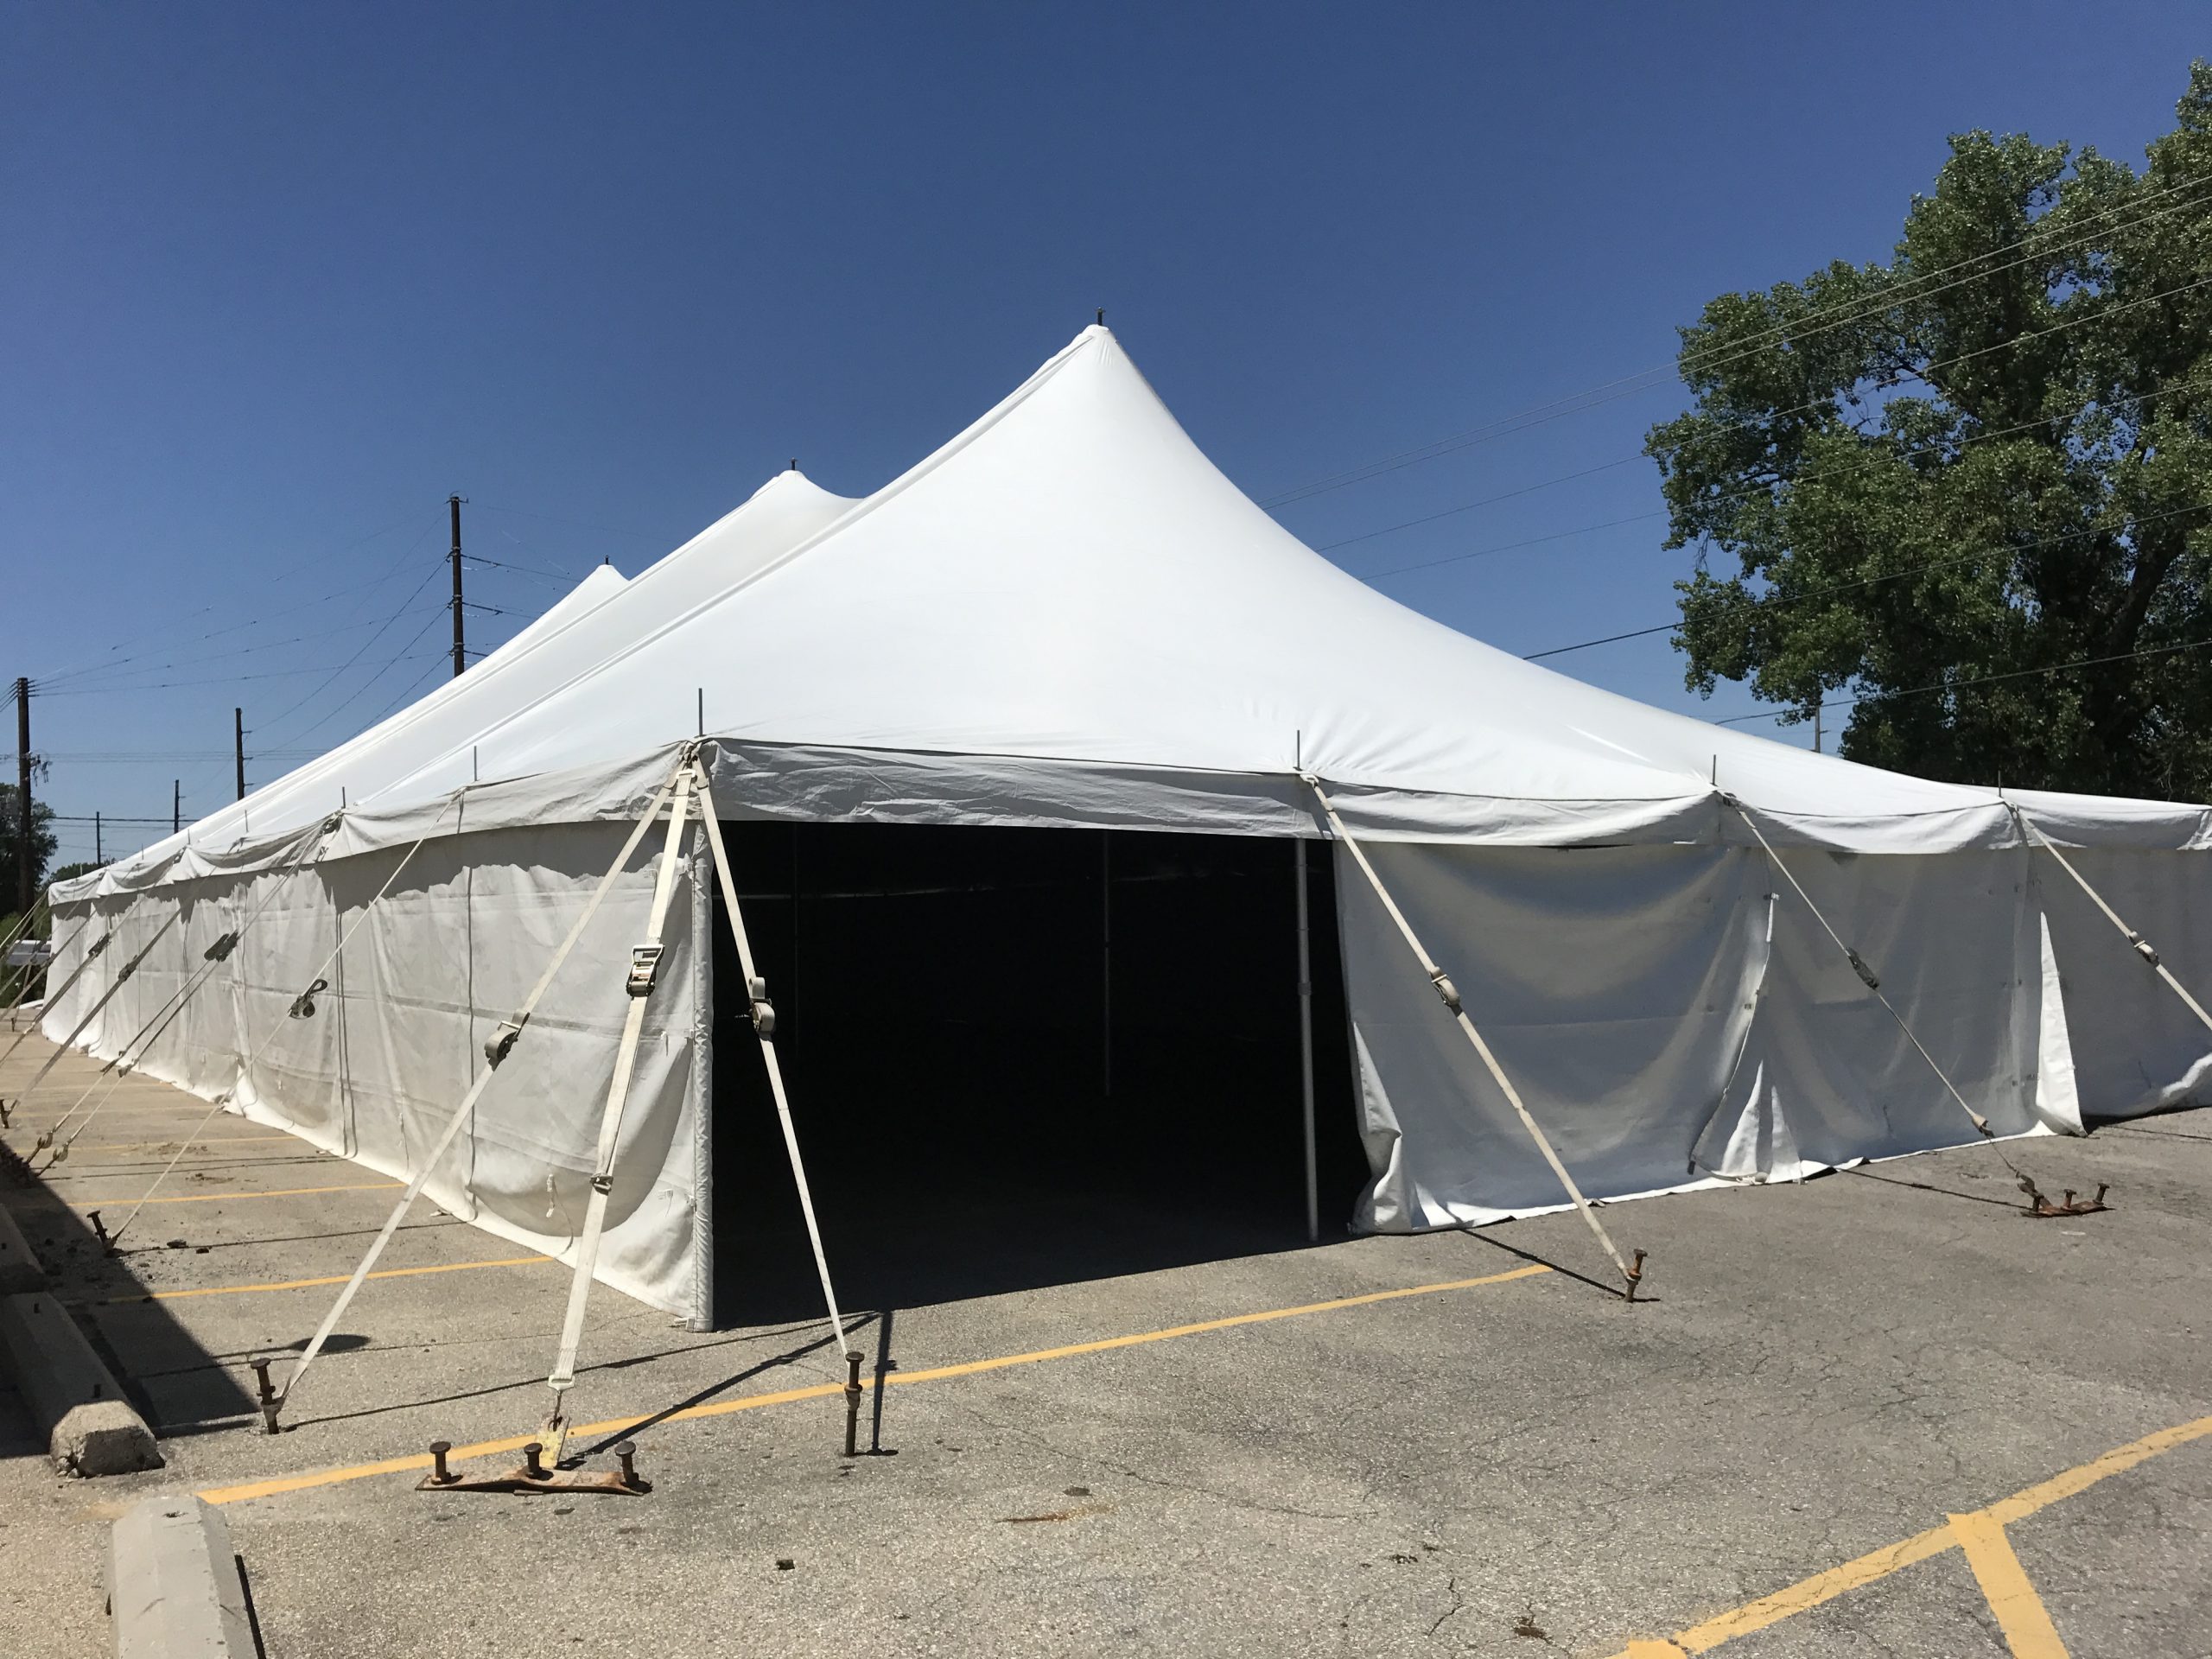 40' x 80' rope and pole tent set up on Asphalt for Store for Homes furniture sale